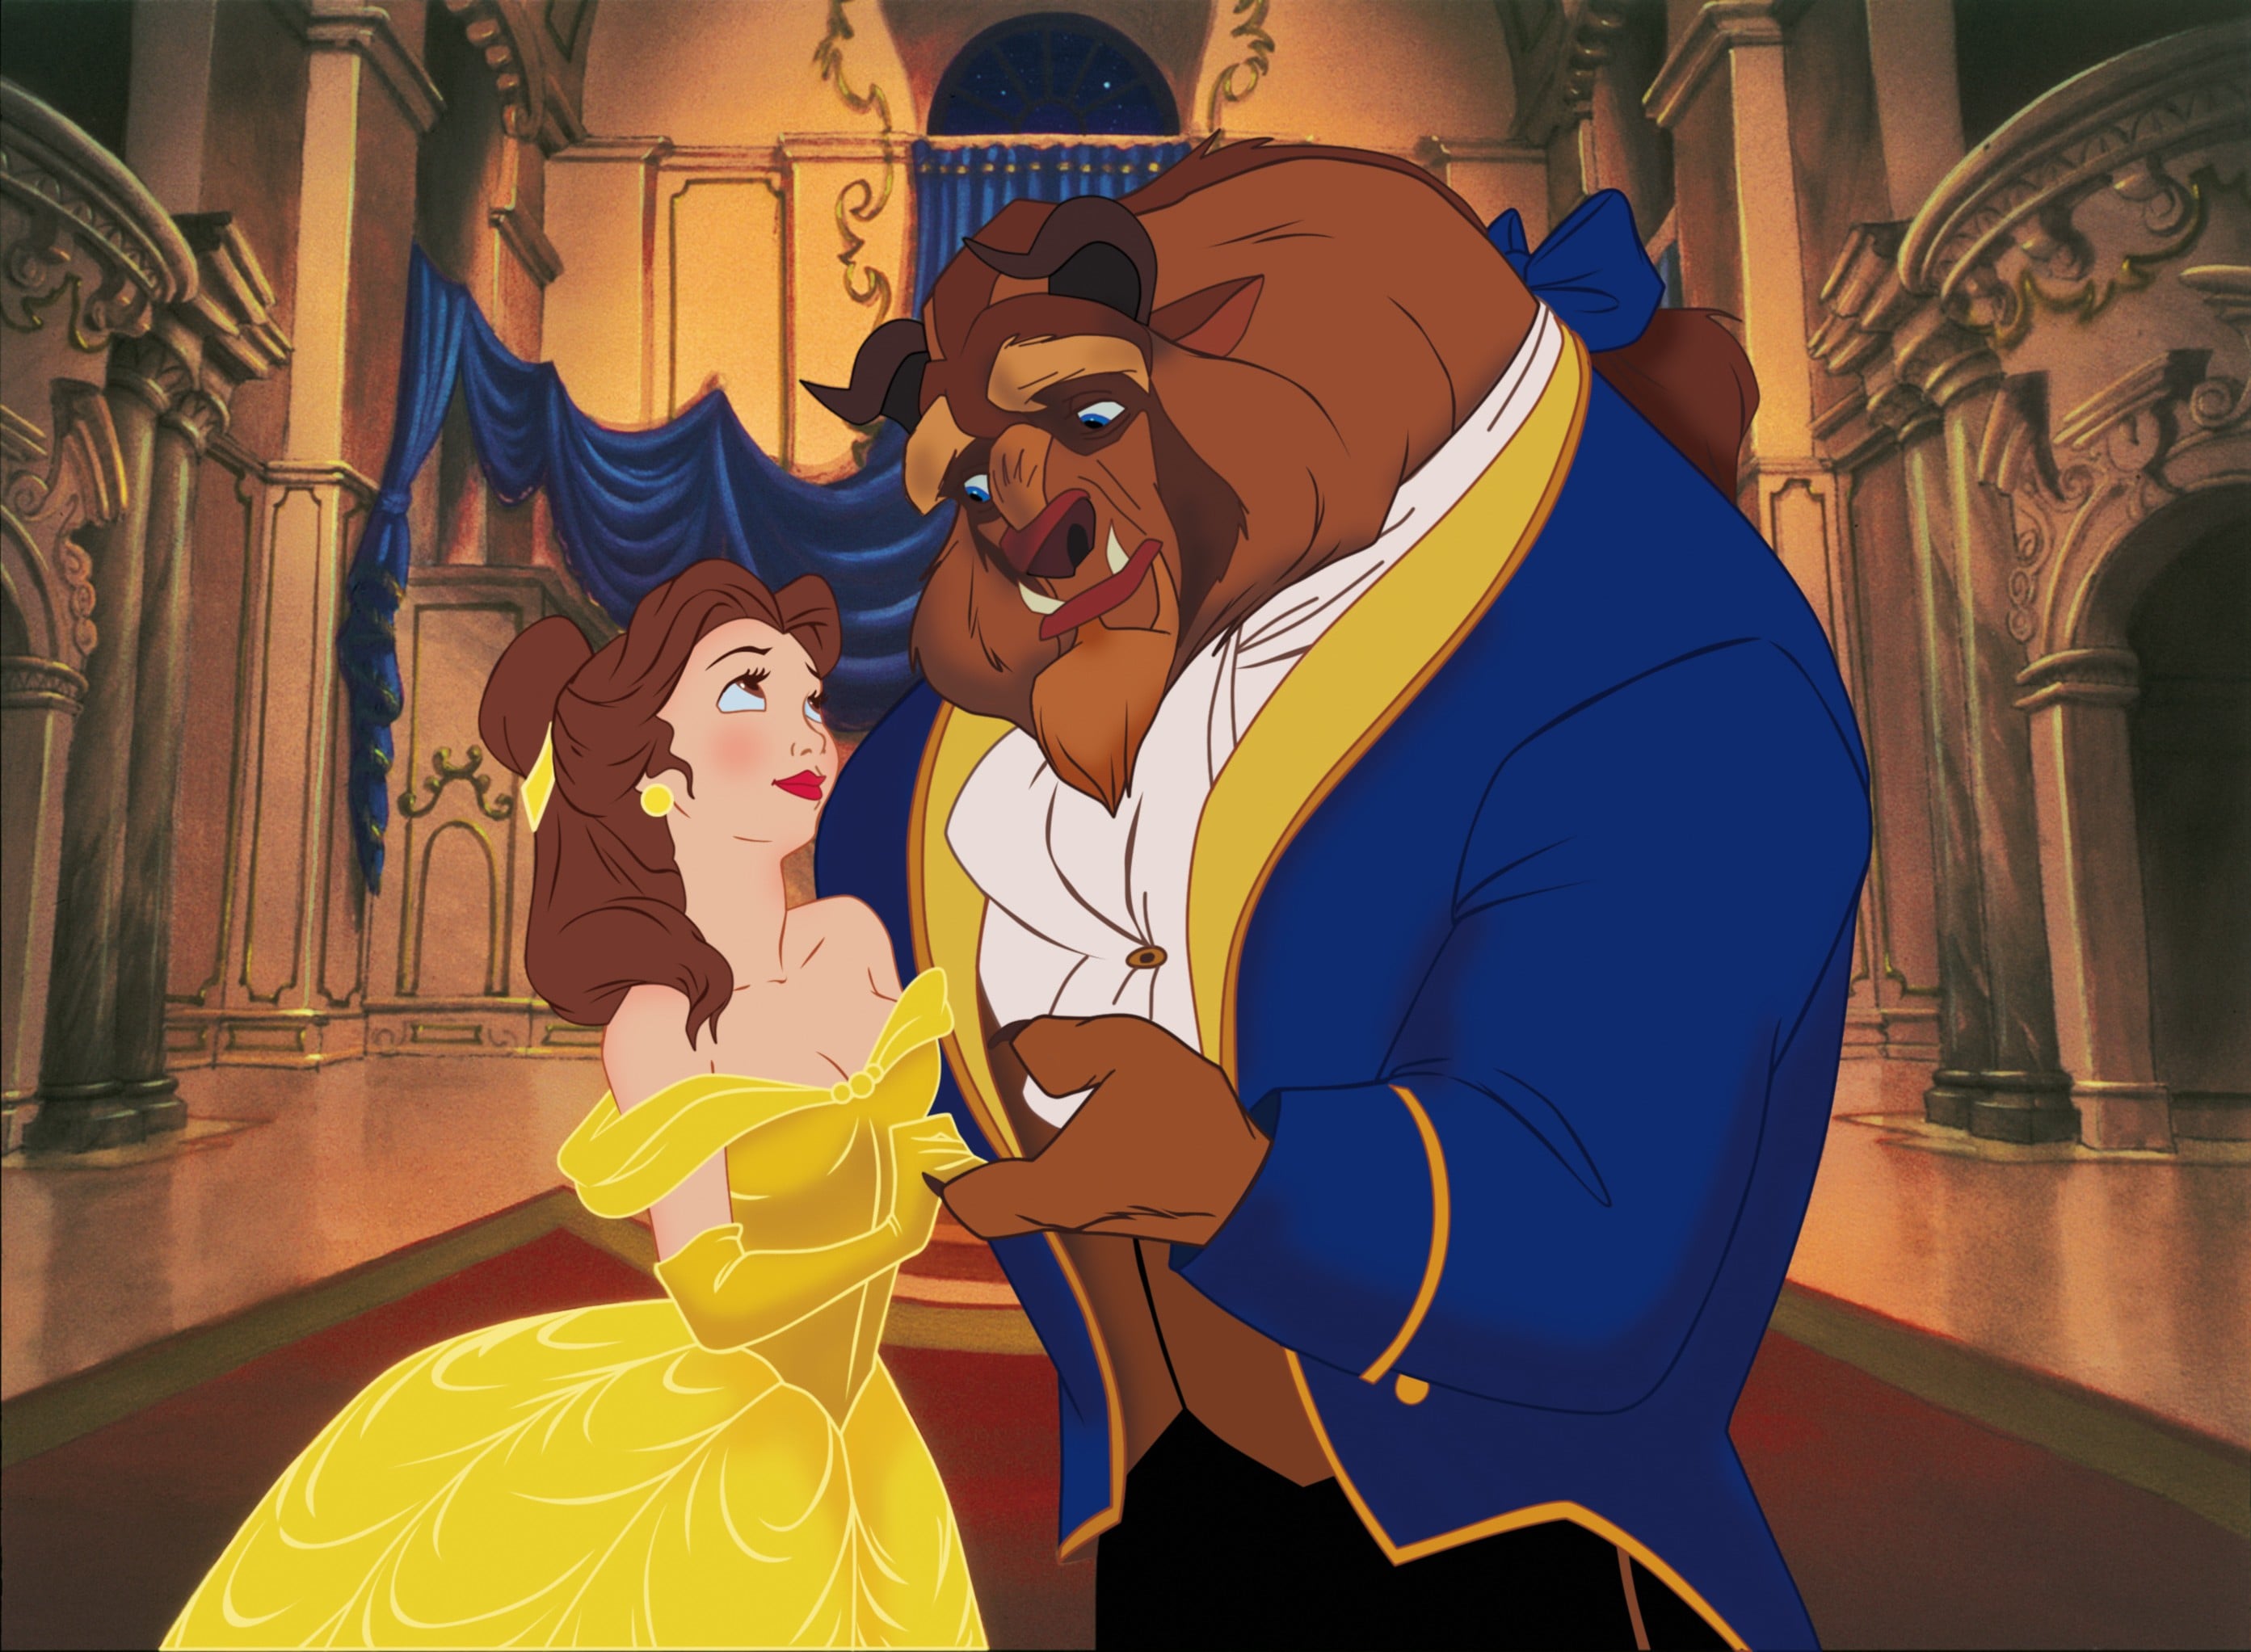 Disney's Art of Animation: From Mickey Mouse to Beauty and the Beast